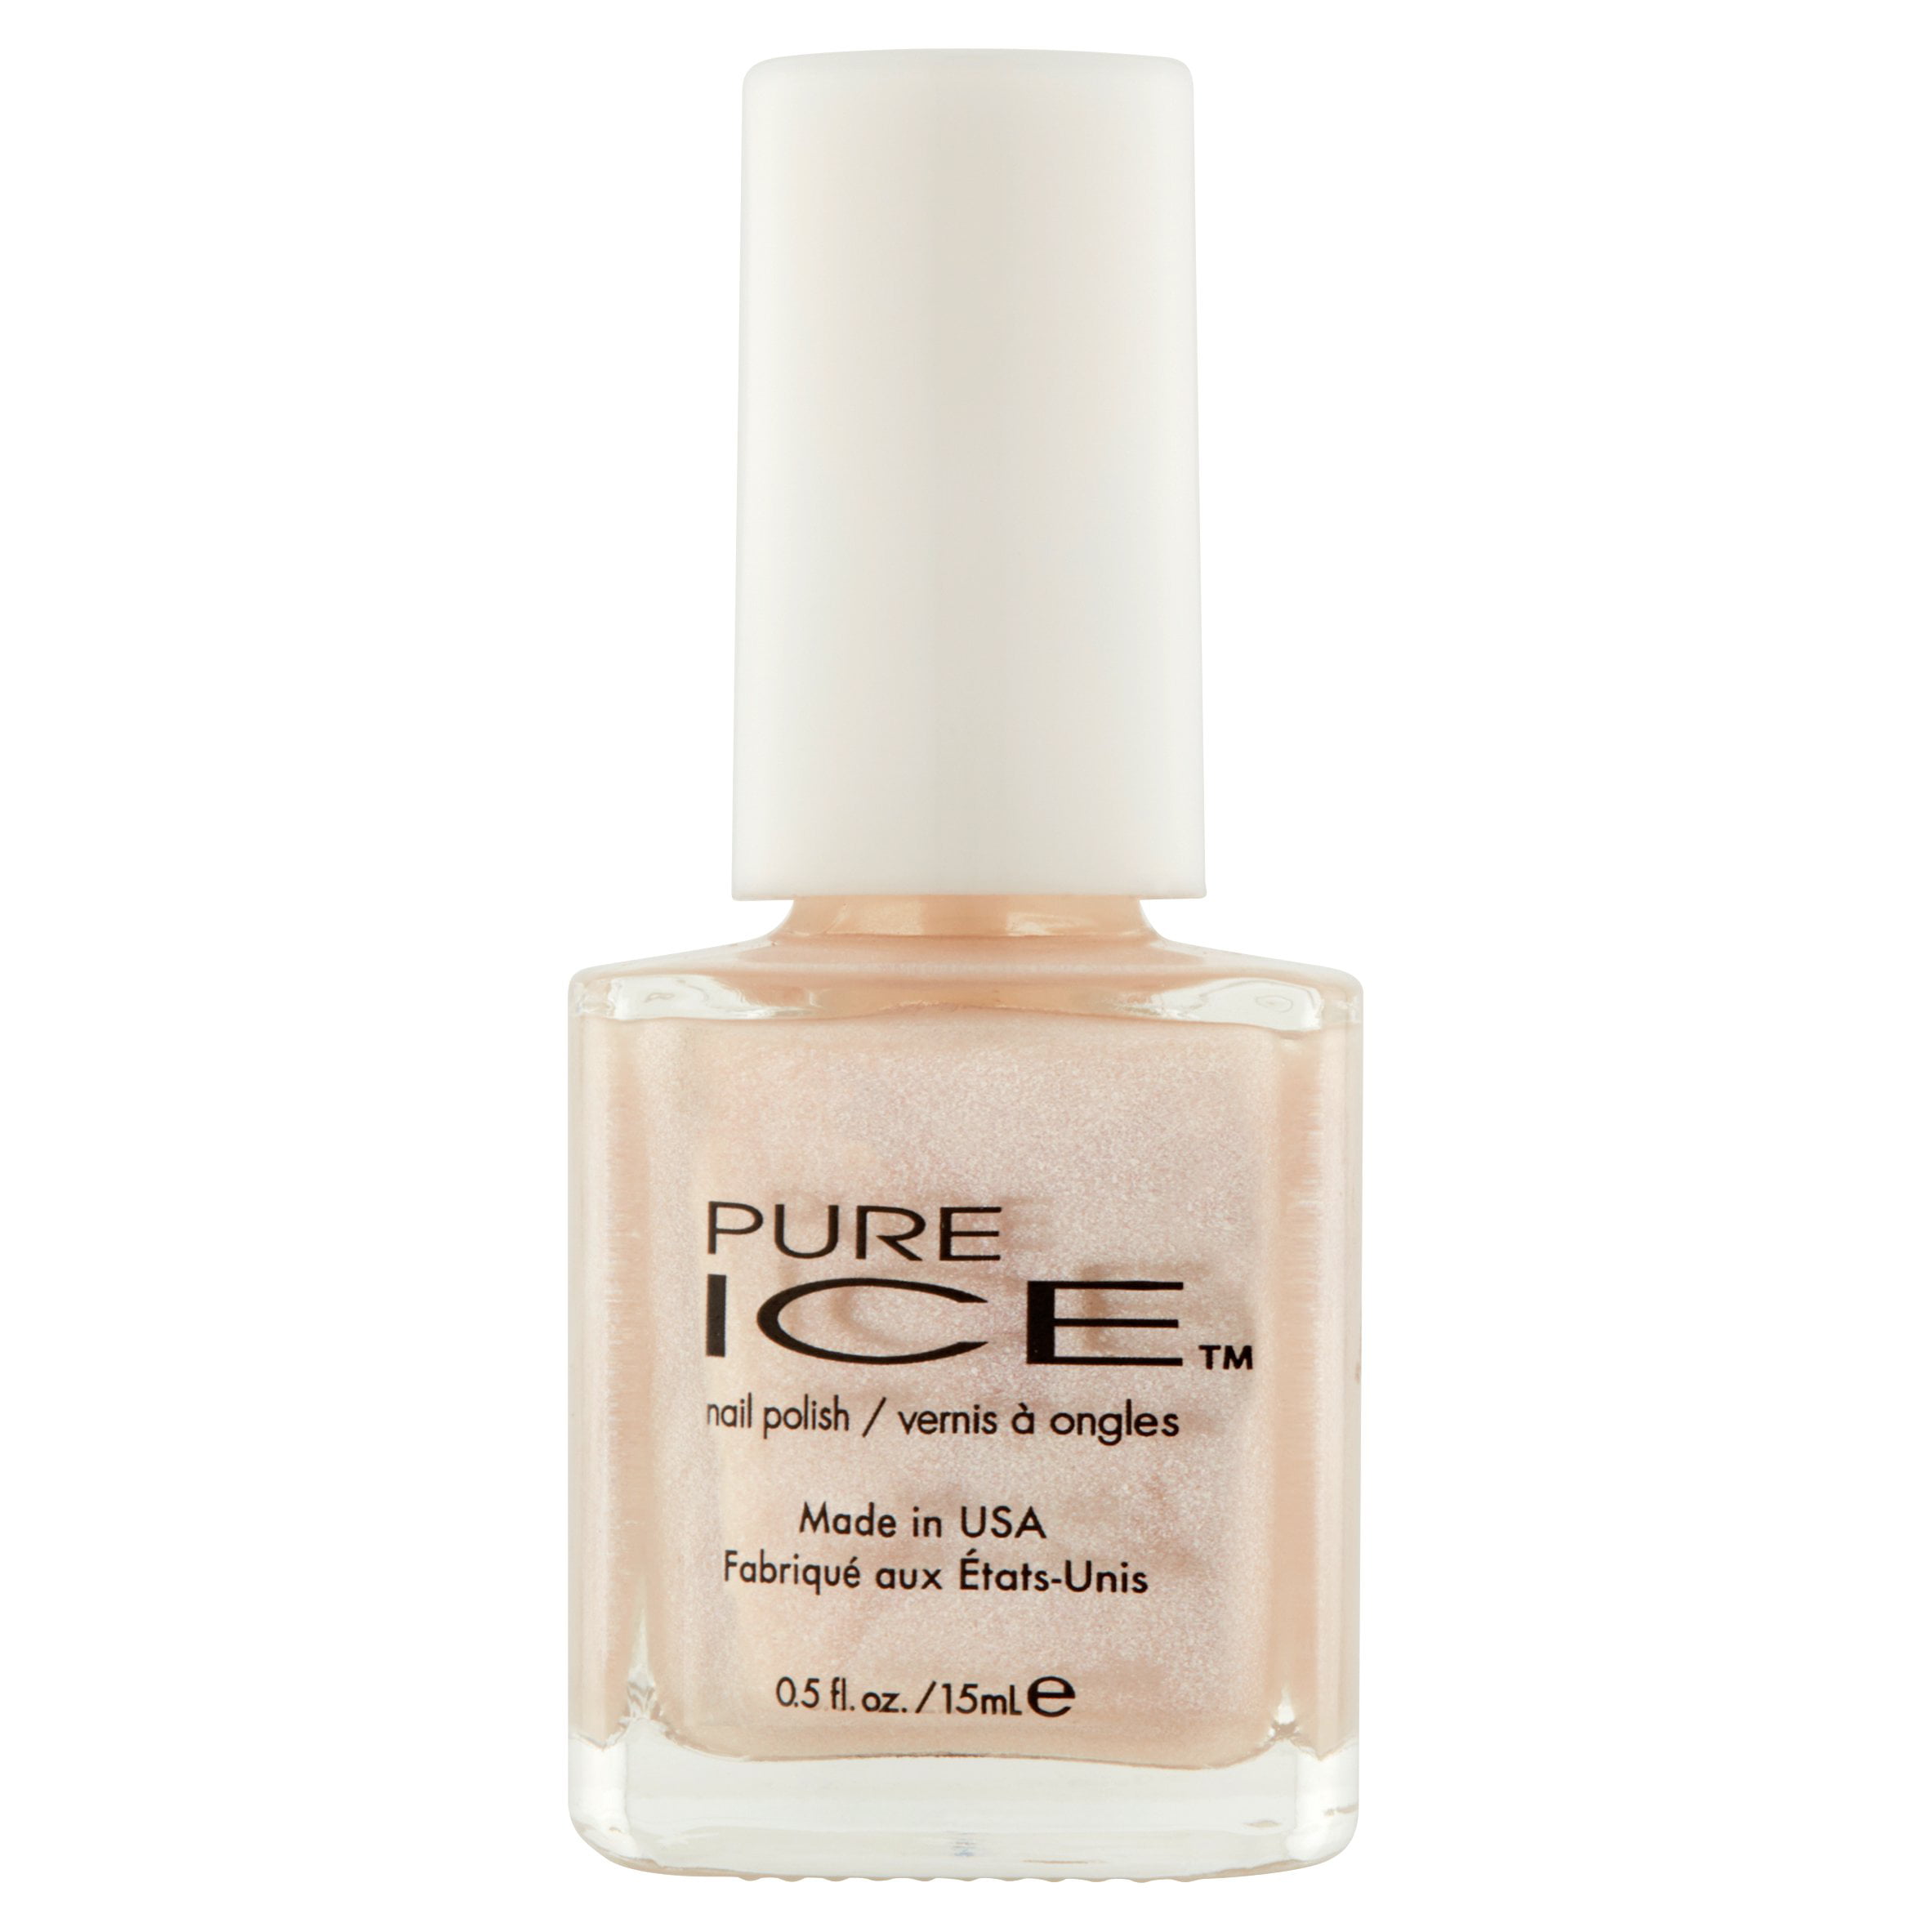 Buy Pure Ice Shine with Gel Tech Nail Polish, I Shine for You, 0.5 fl oz  Online at Low Prices in India - Amazon.in